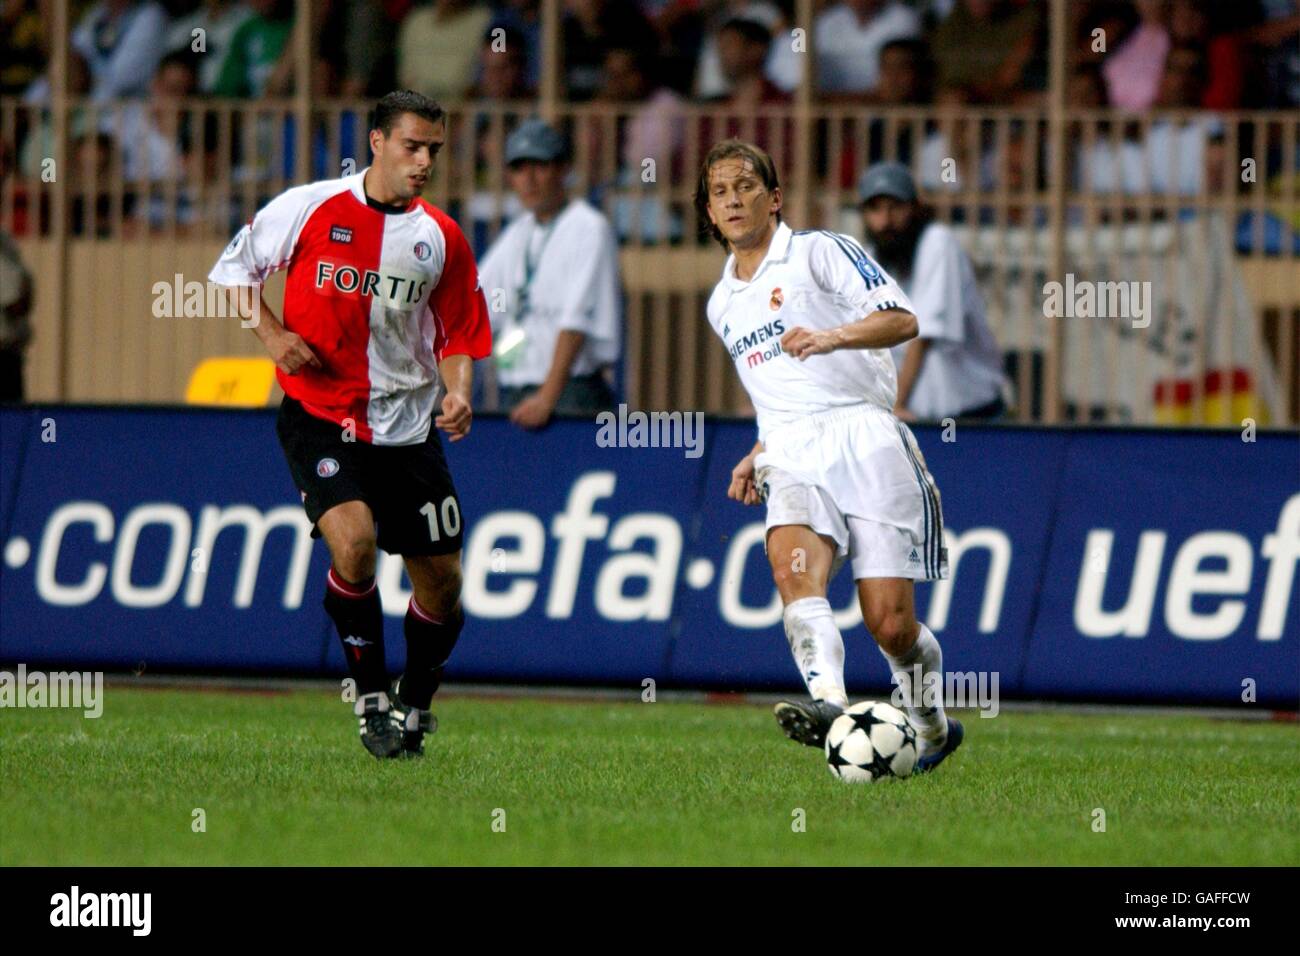 Real Madrid's Michel Salgado (r) passes the ball as he is closed down by Feyenoord's Anthony Lurling (l) Stock Photo